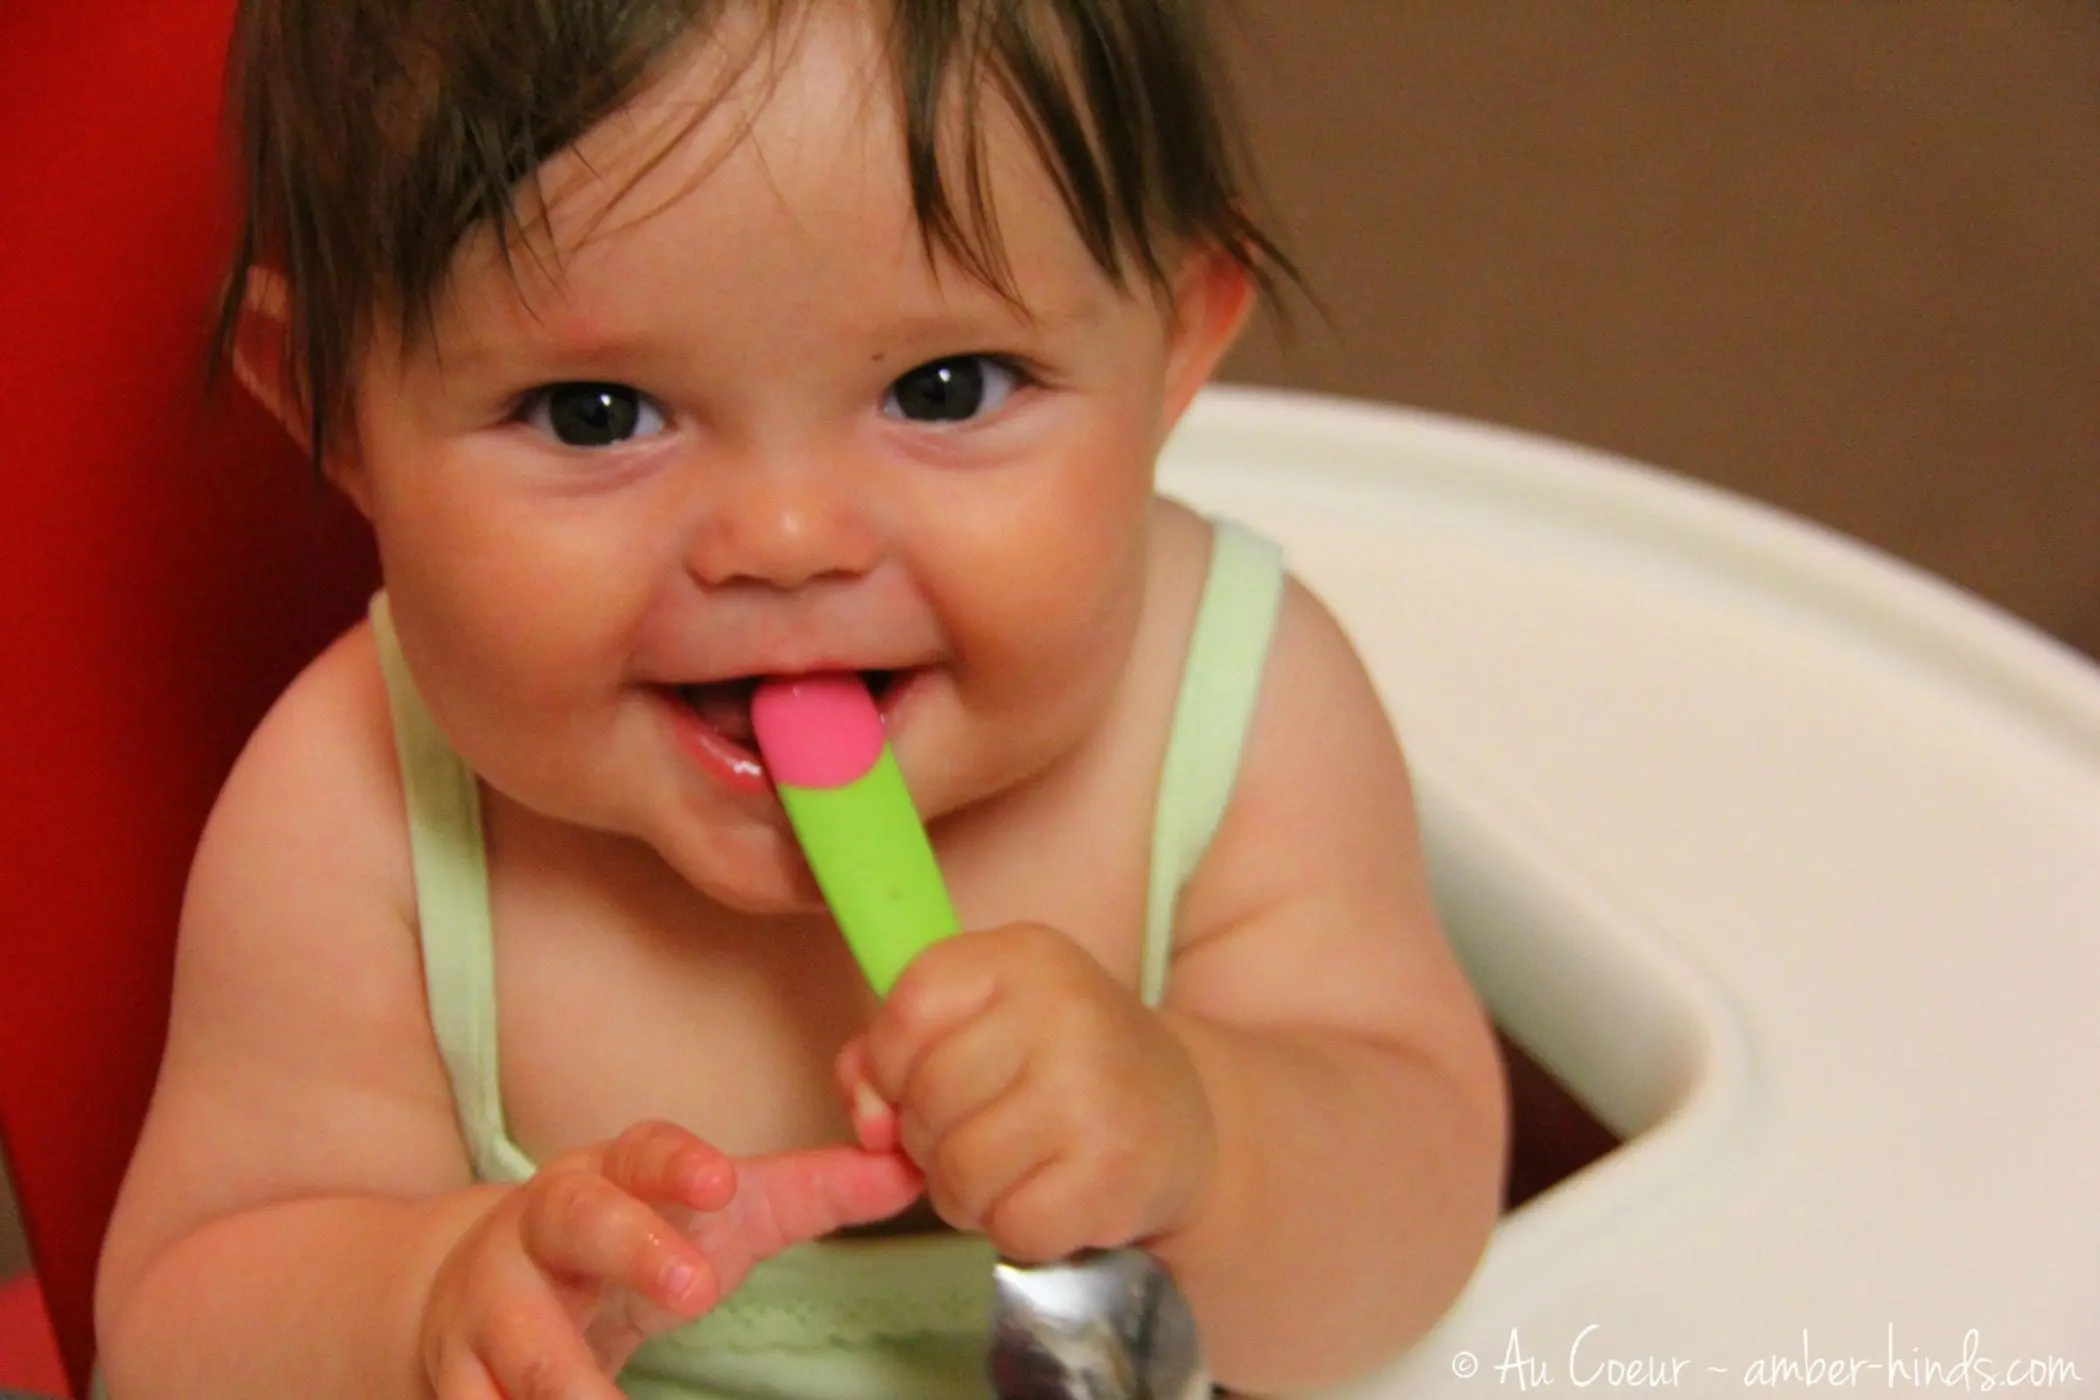 Why I Am Waiting to Start Giving My Baby Solid Food